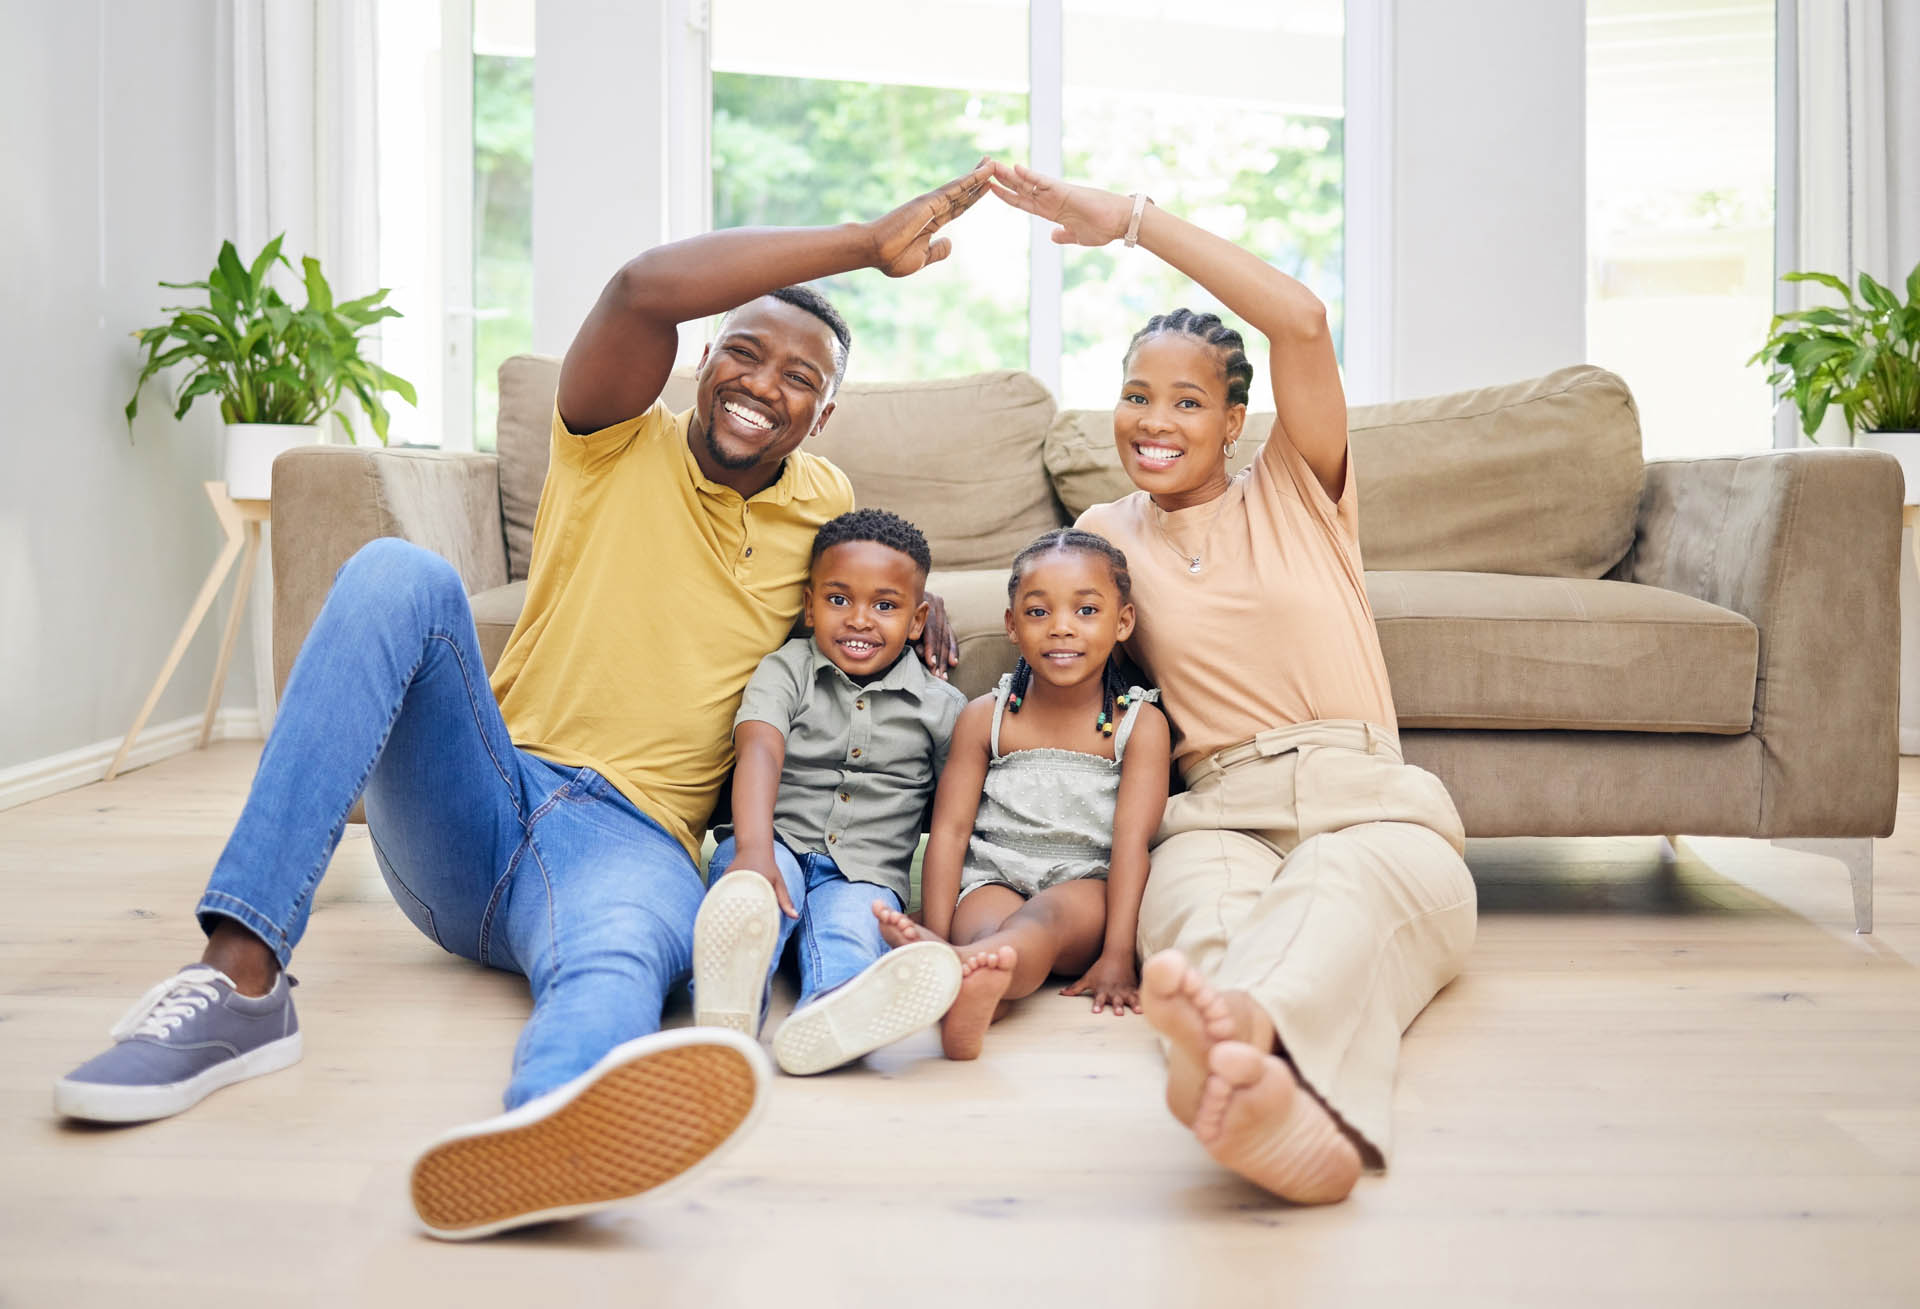 A happy family of four sits on the floor making a roof shape with their arms over two children, smiling in a well-lit living room with visible heating and cooling books on the shelf.